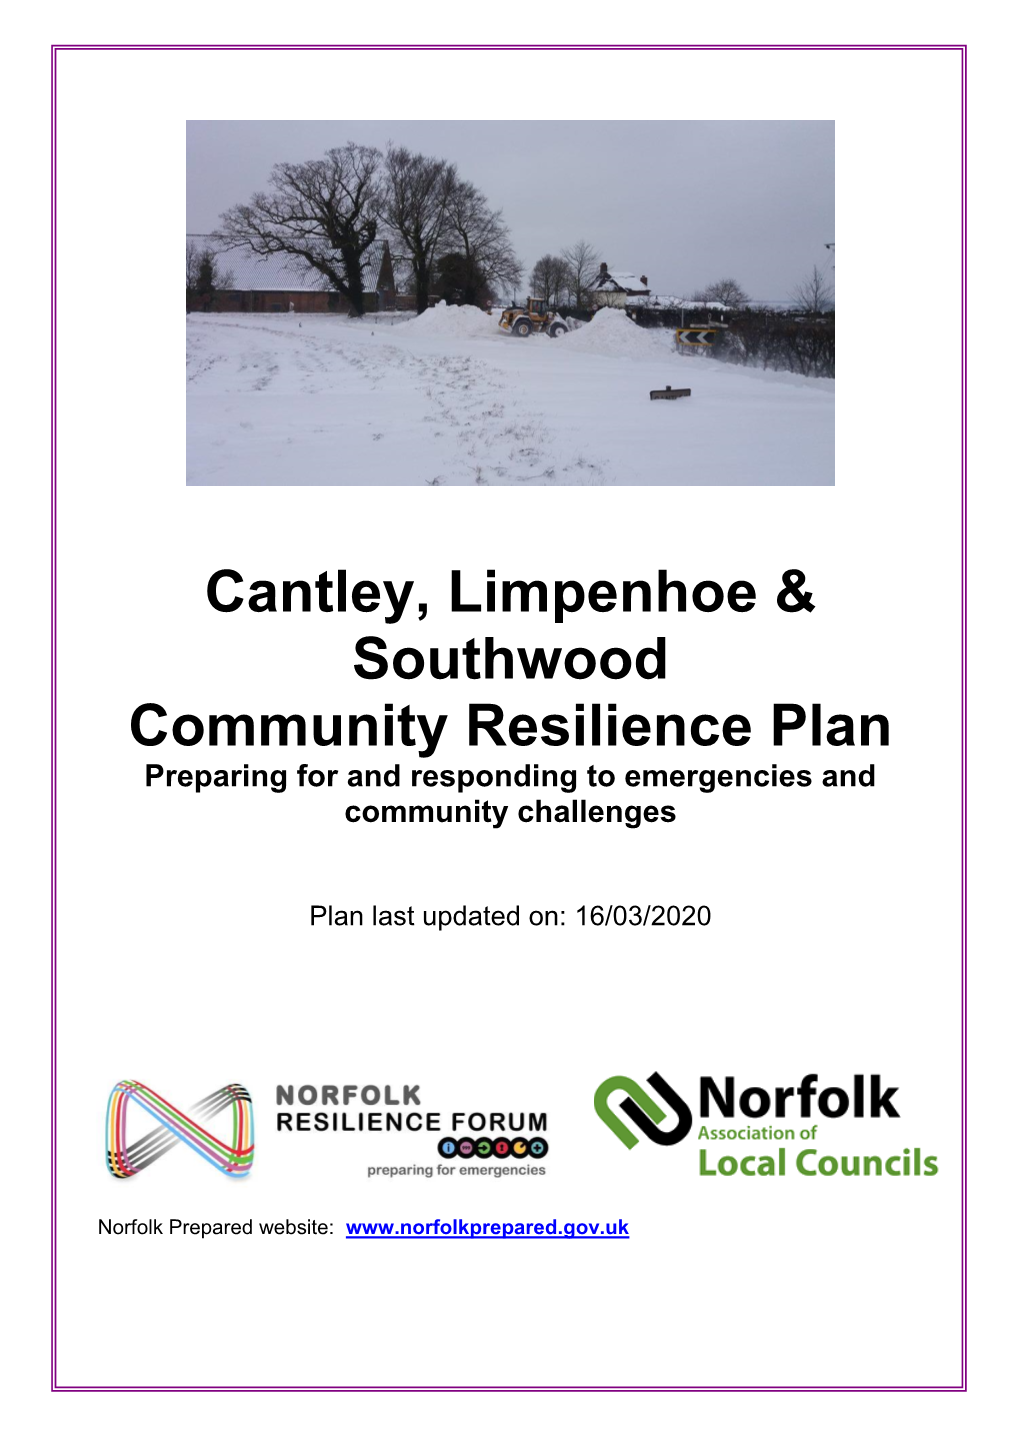 Cantley, Limpenhoe & Southwood Community Resilience Plan